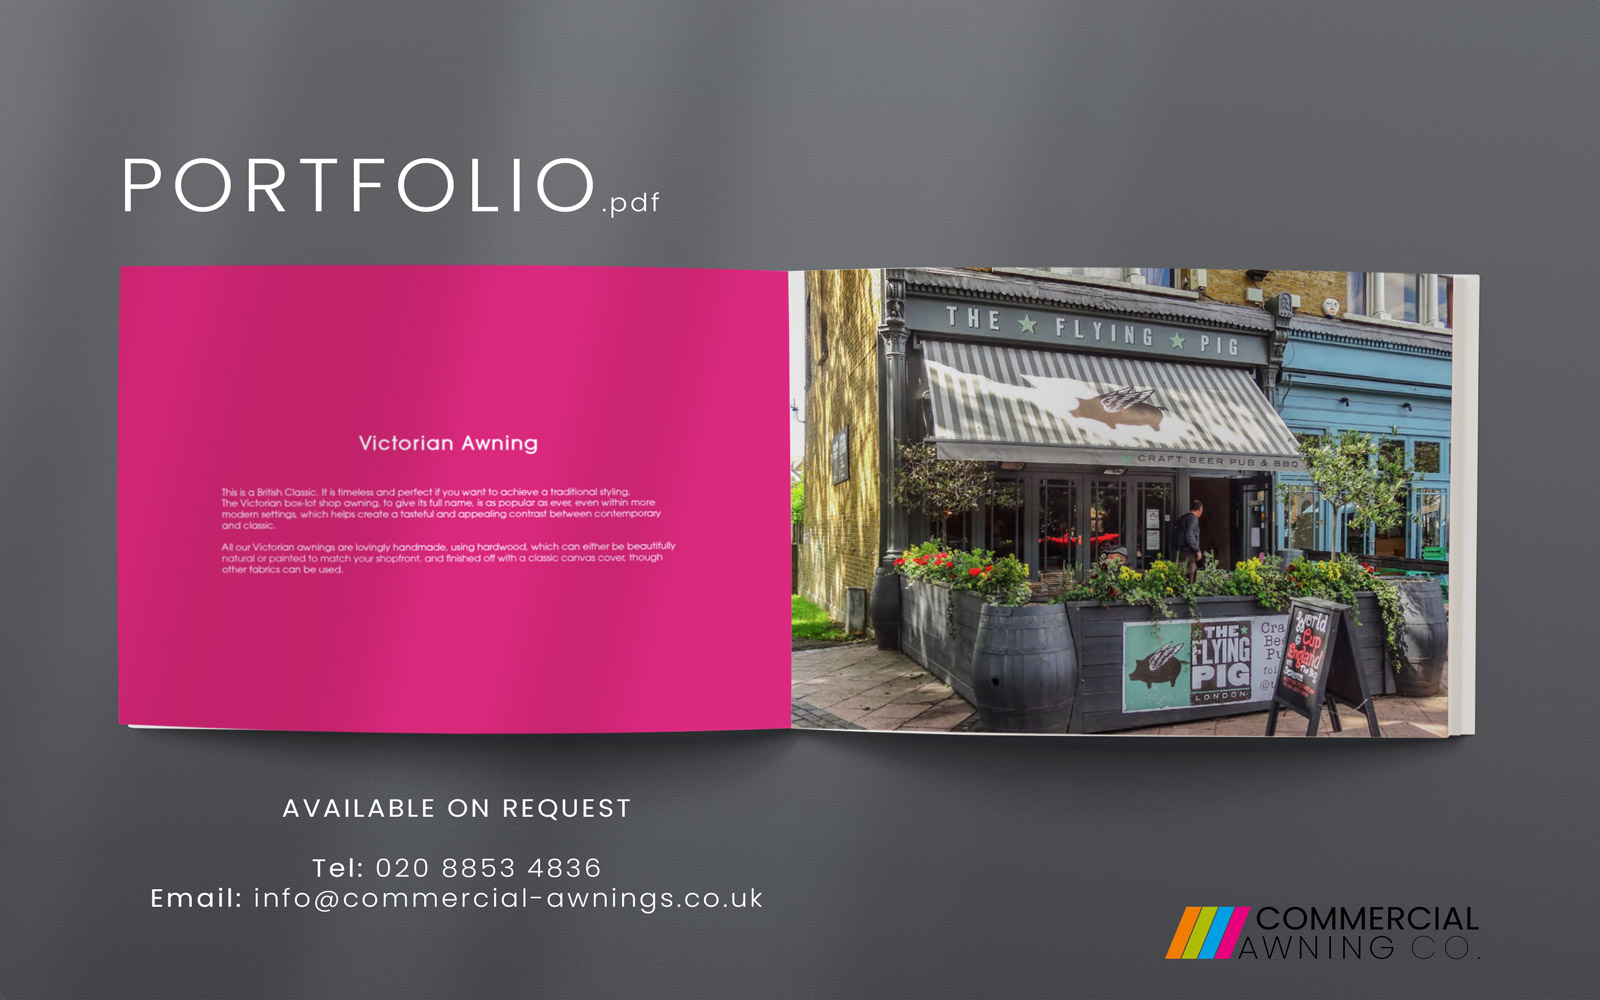 The Commercial Awning Company Portfolio